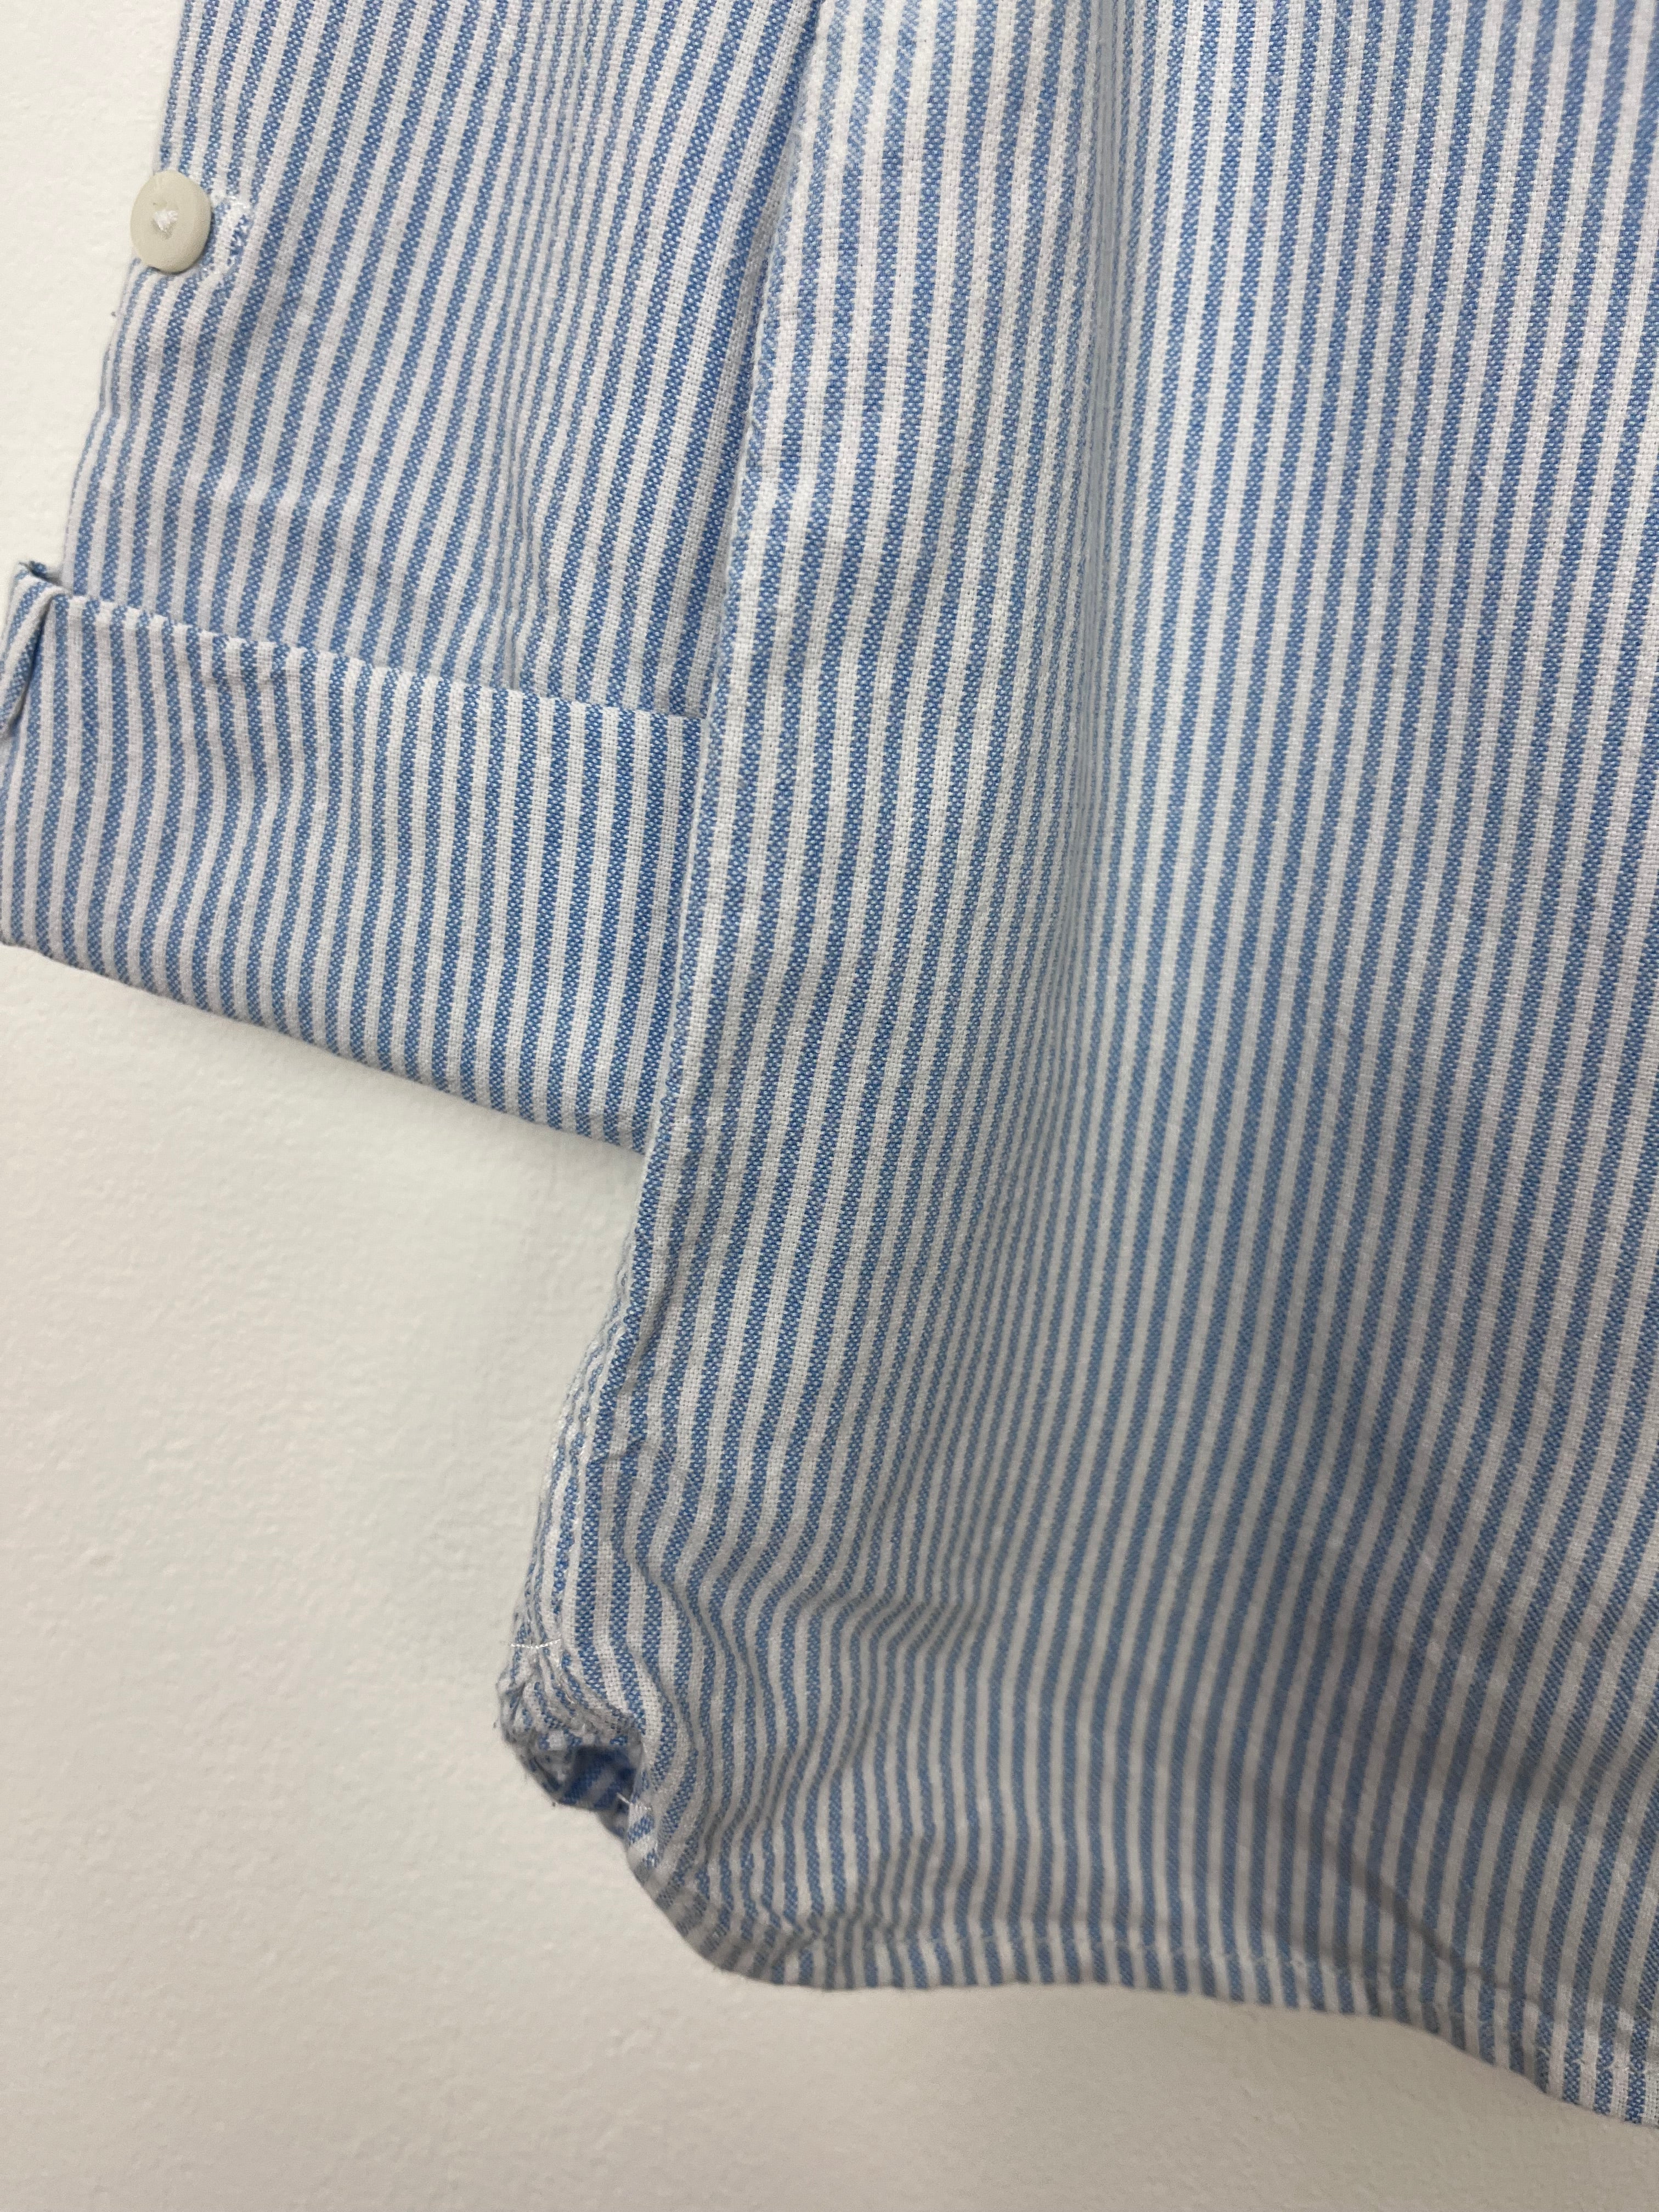 M&S 5-6 Years-Shirts-Second Snuggle Preloved